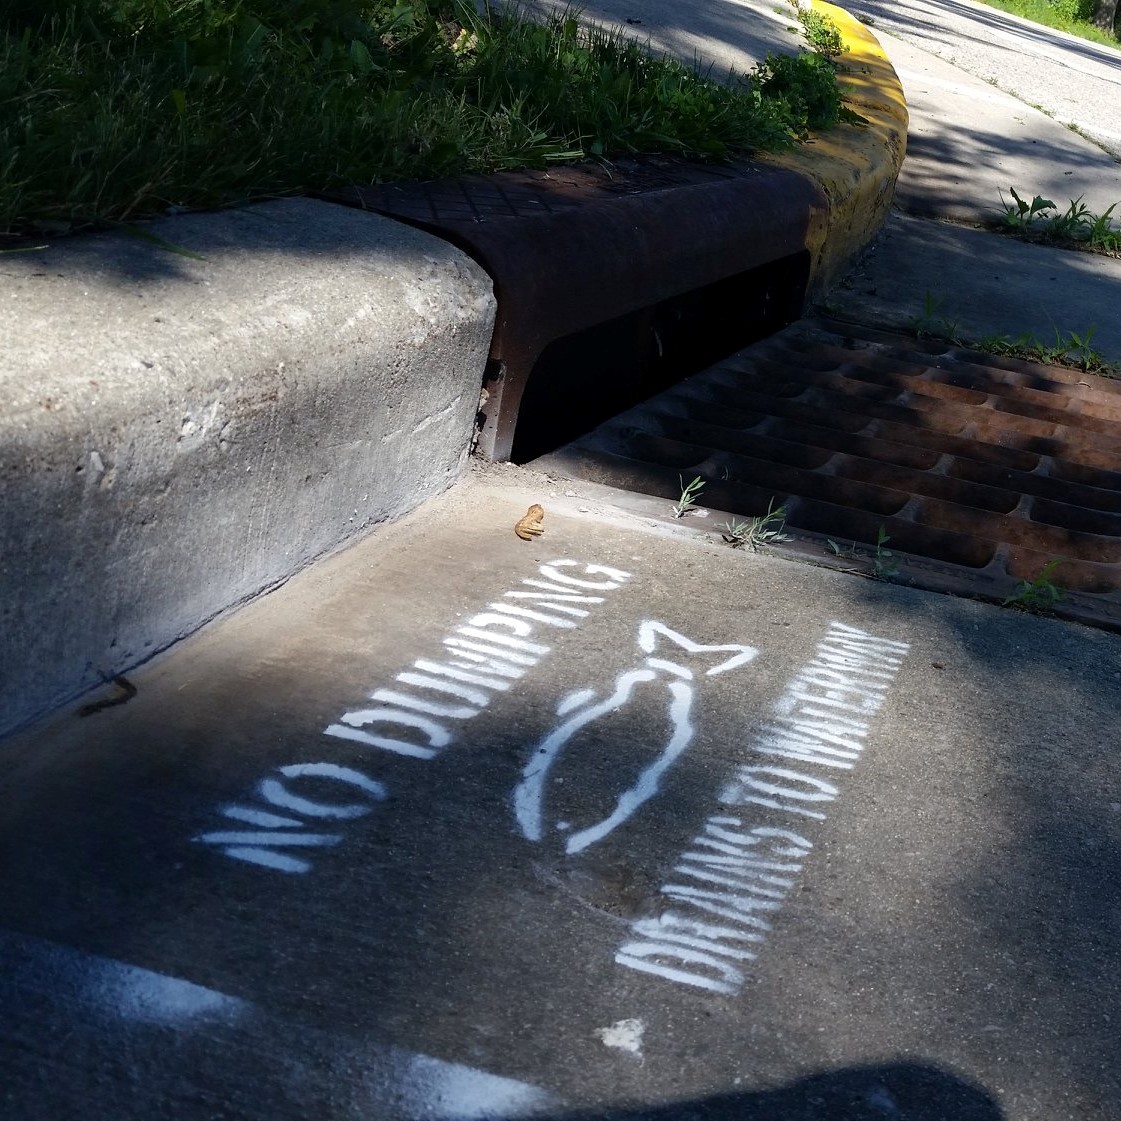 a painted notice on the road next to a storm drain that reads "no dumping drains to waterway"